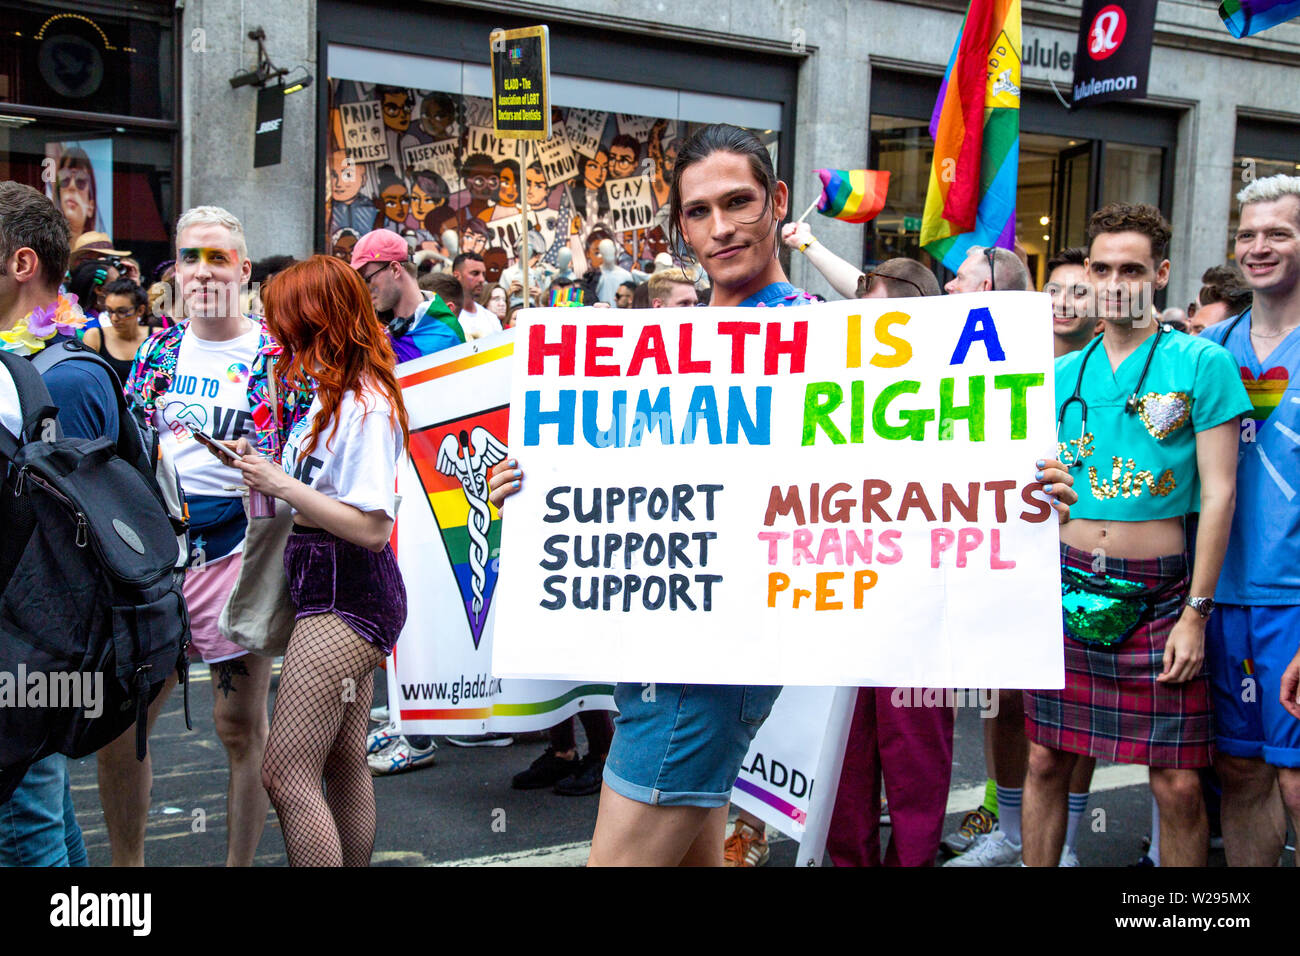 6 July 2019 - Person holding sign 'Health is a human right', London Pride Parade, UK Stock Photo